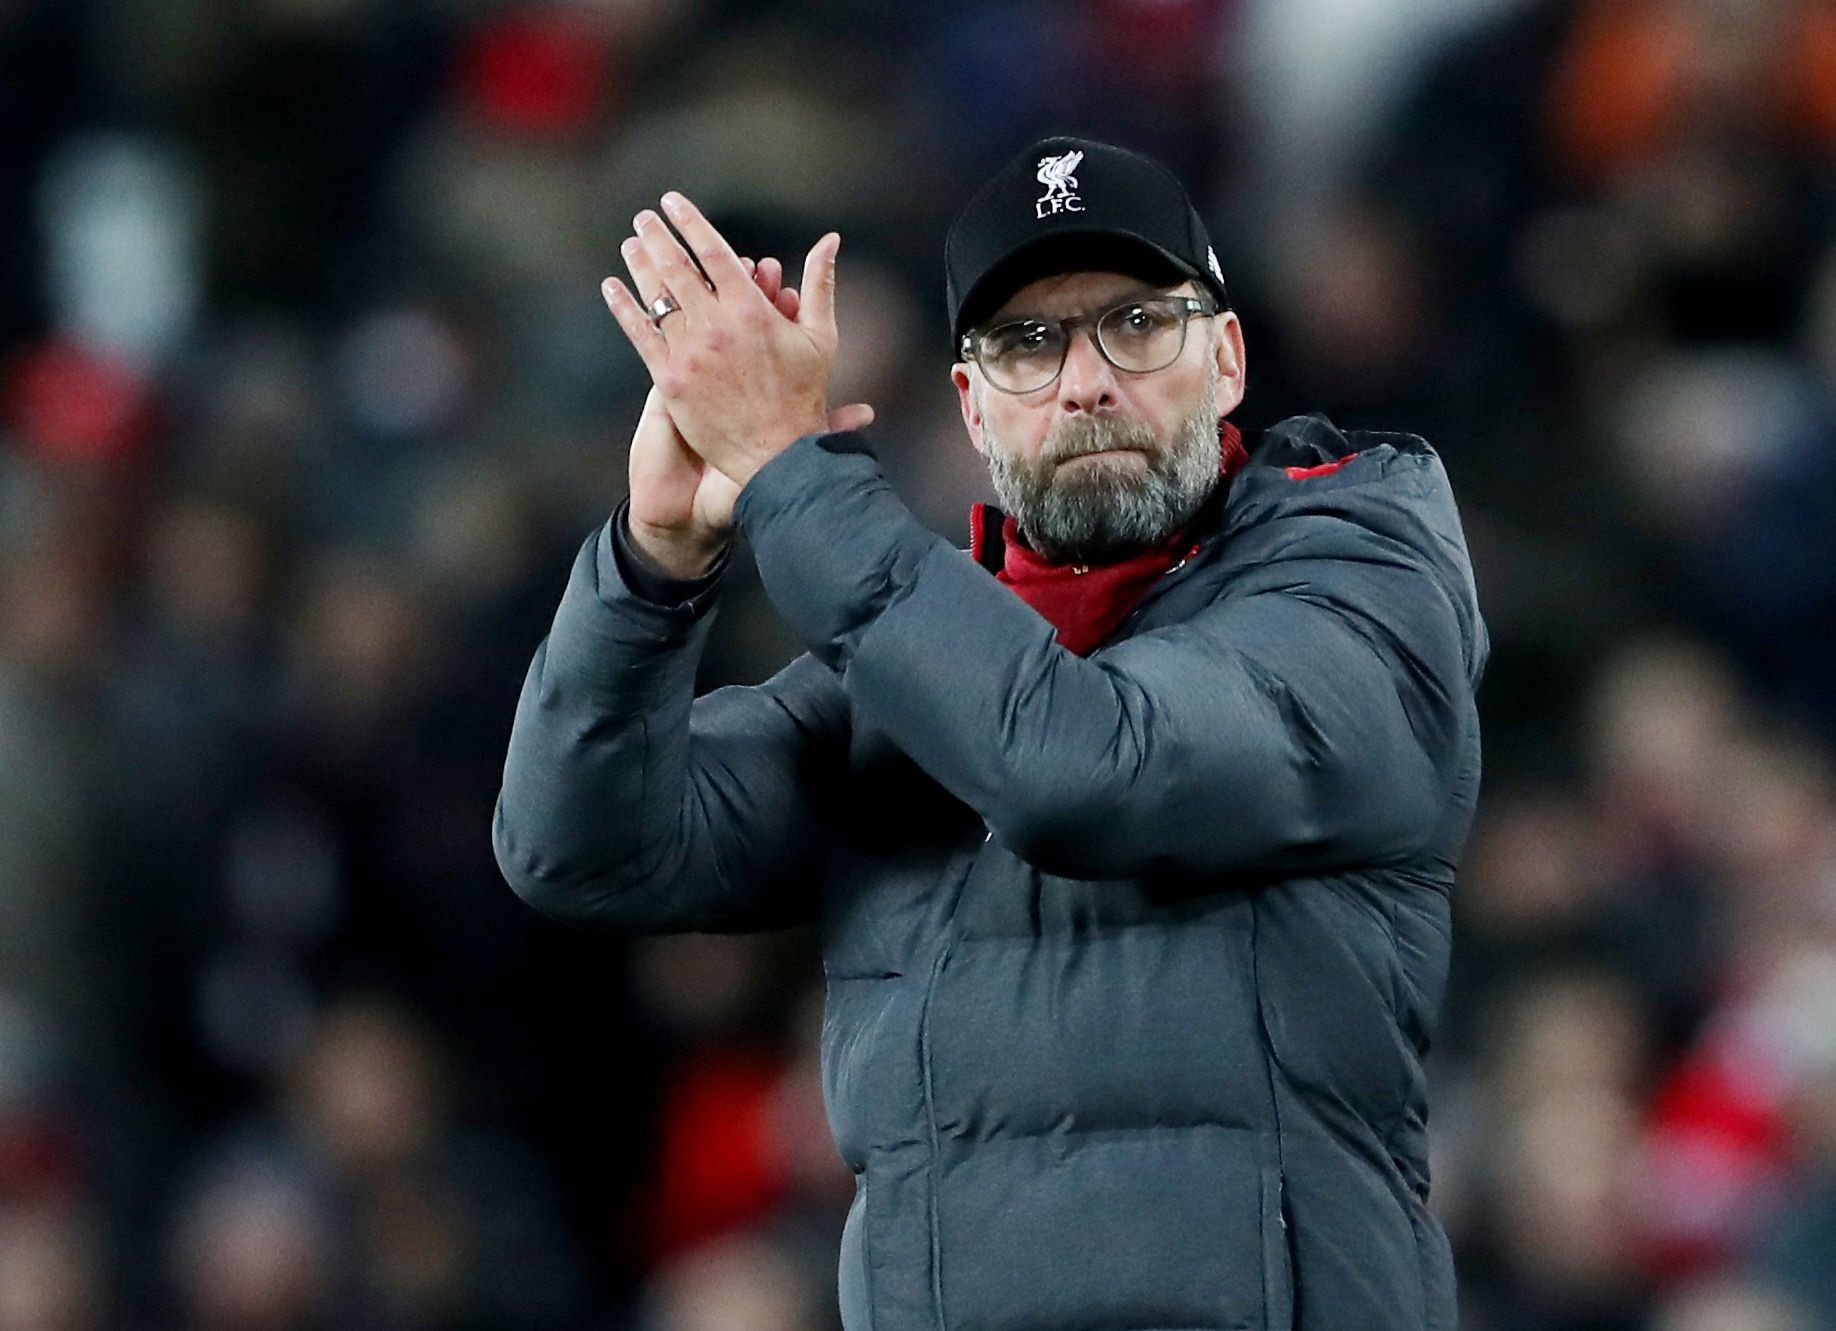 Soccer Football - Premier League - Liverpool v Everton - Anfield, Liverpool, Britain - December 4, 2019  Liverpool manager Juergen Klopp celebrates after the match  REUTERS/Scott Heppell  EDITORIAL USE ONLY. No use with unauthorized audio, video, data, fixture lists, club/league logos or 